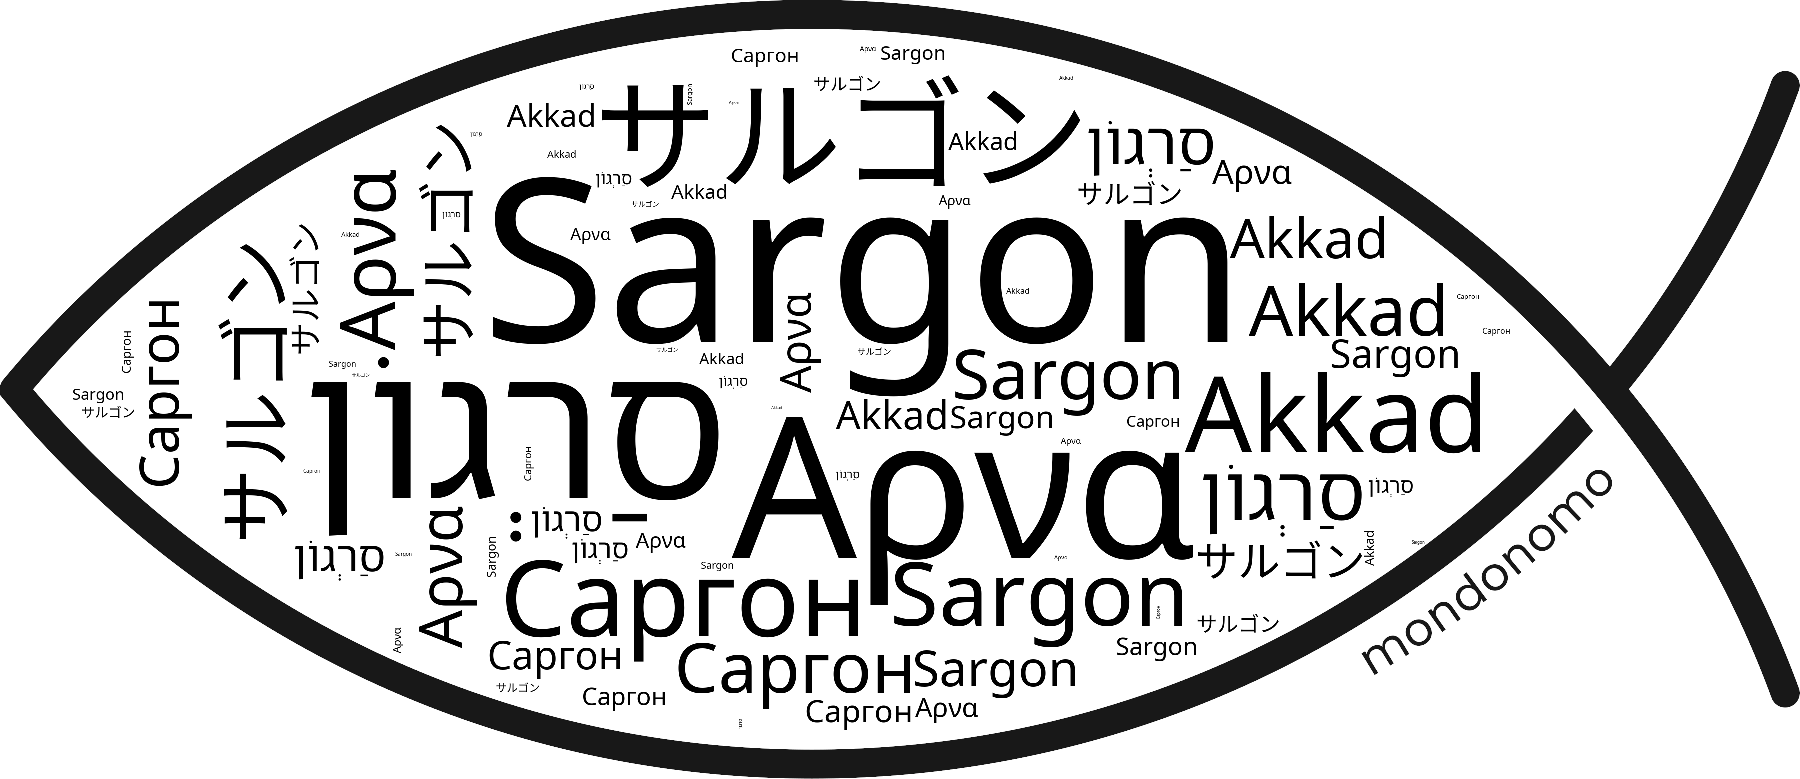 Name Sargon in the world's Bibles